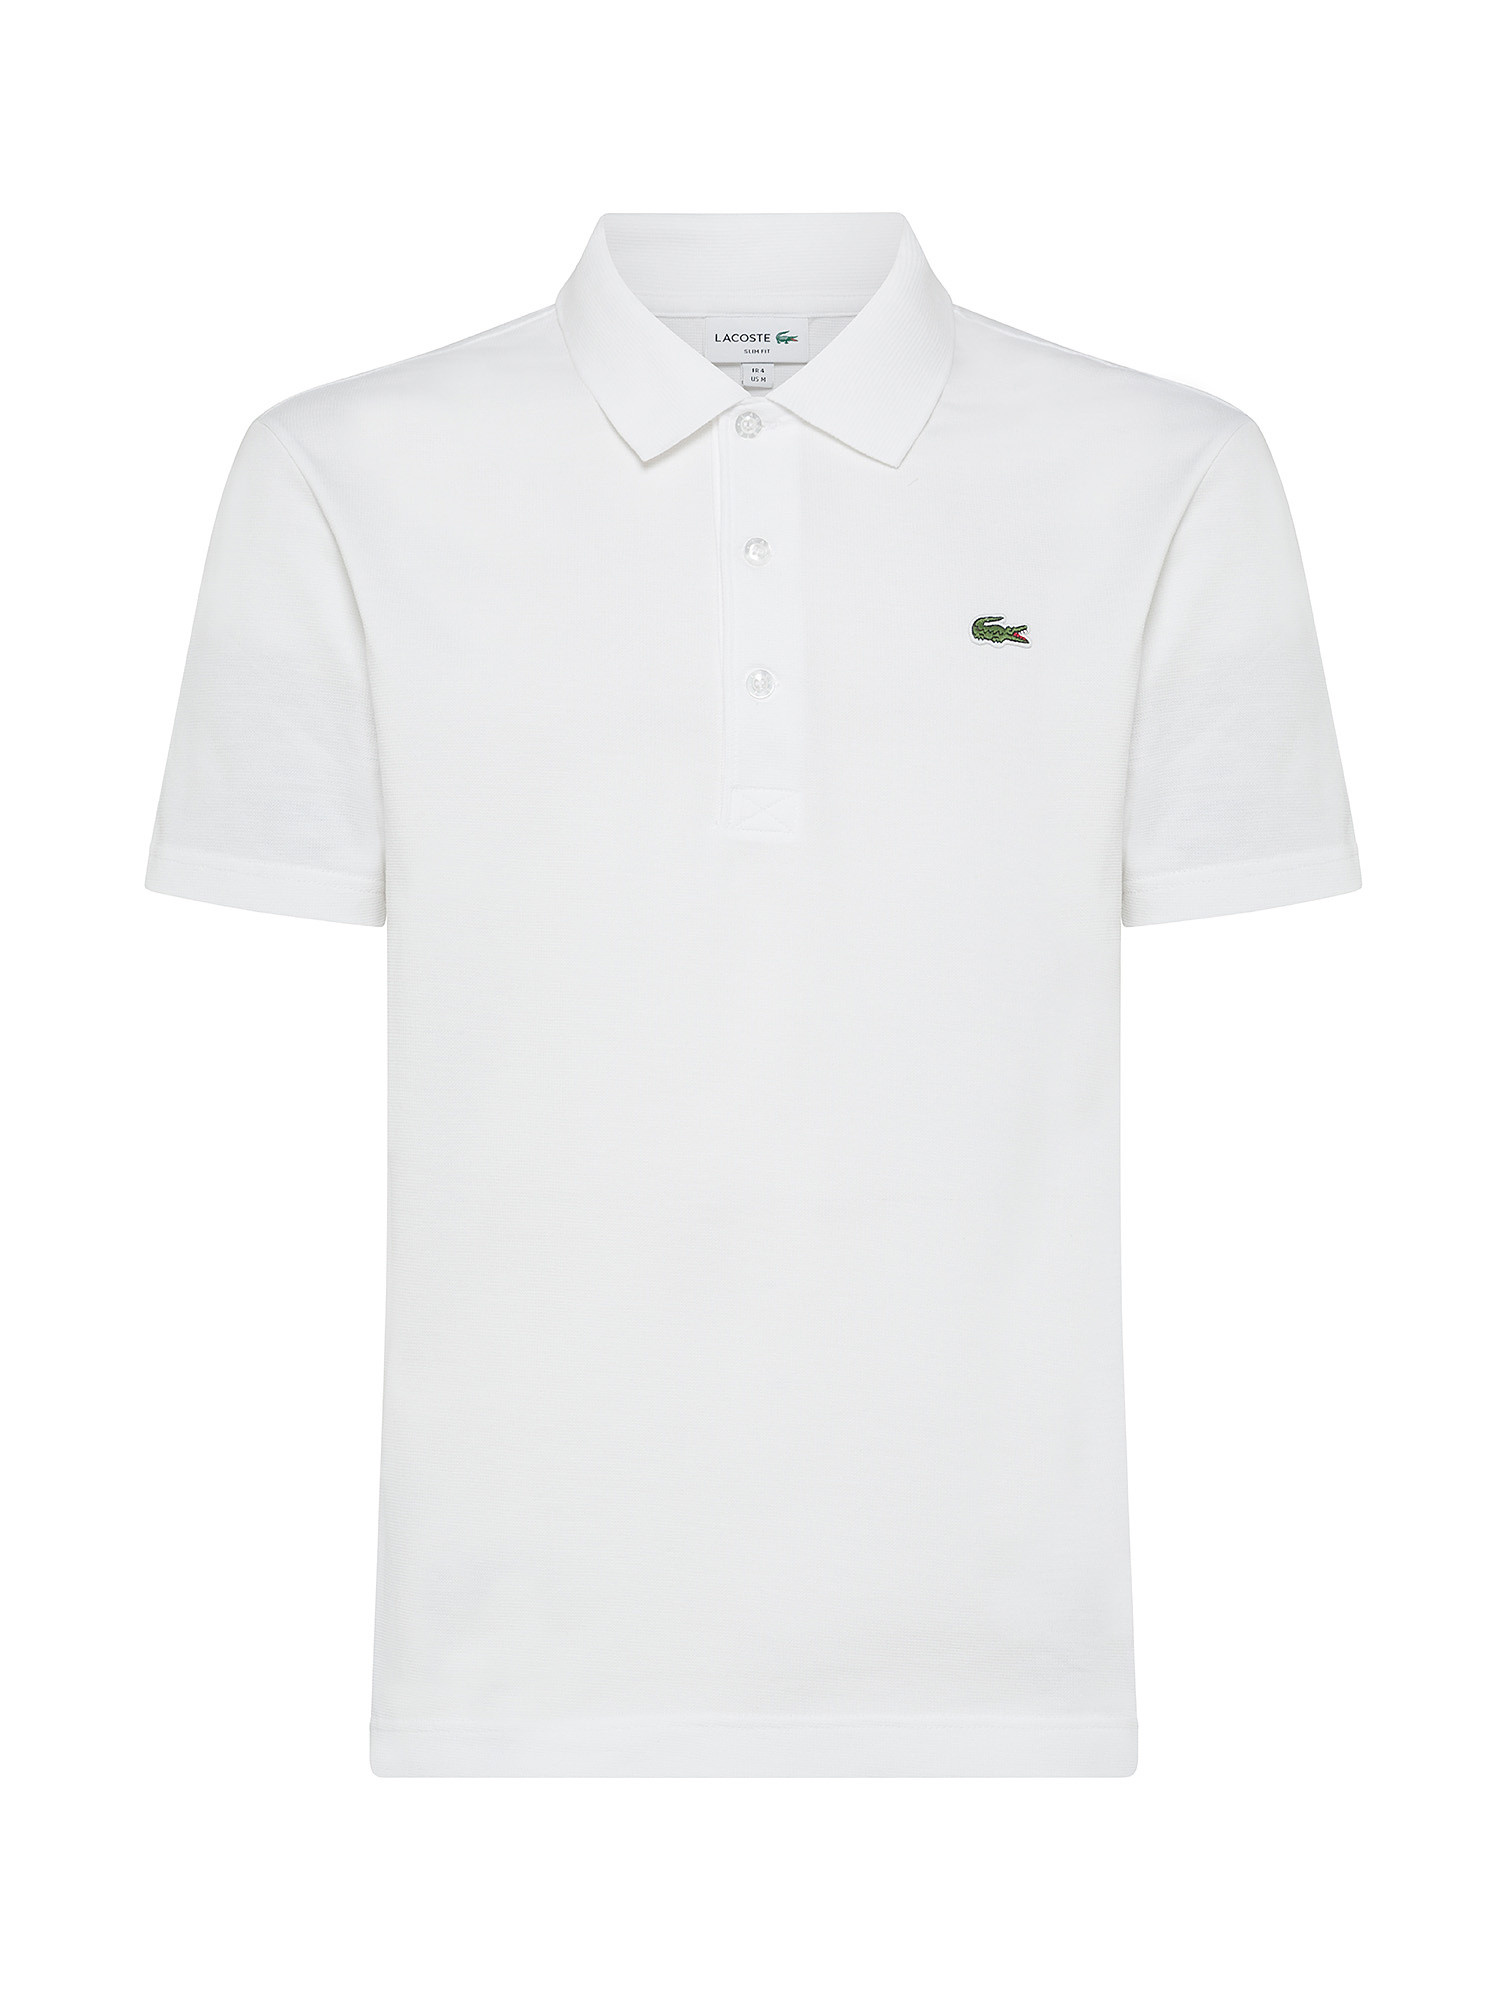 Lacoste - Regular fit stretch polo, White, large image number 0